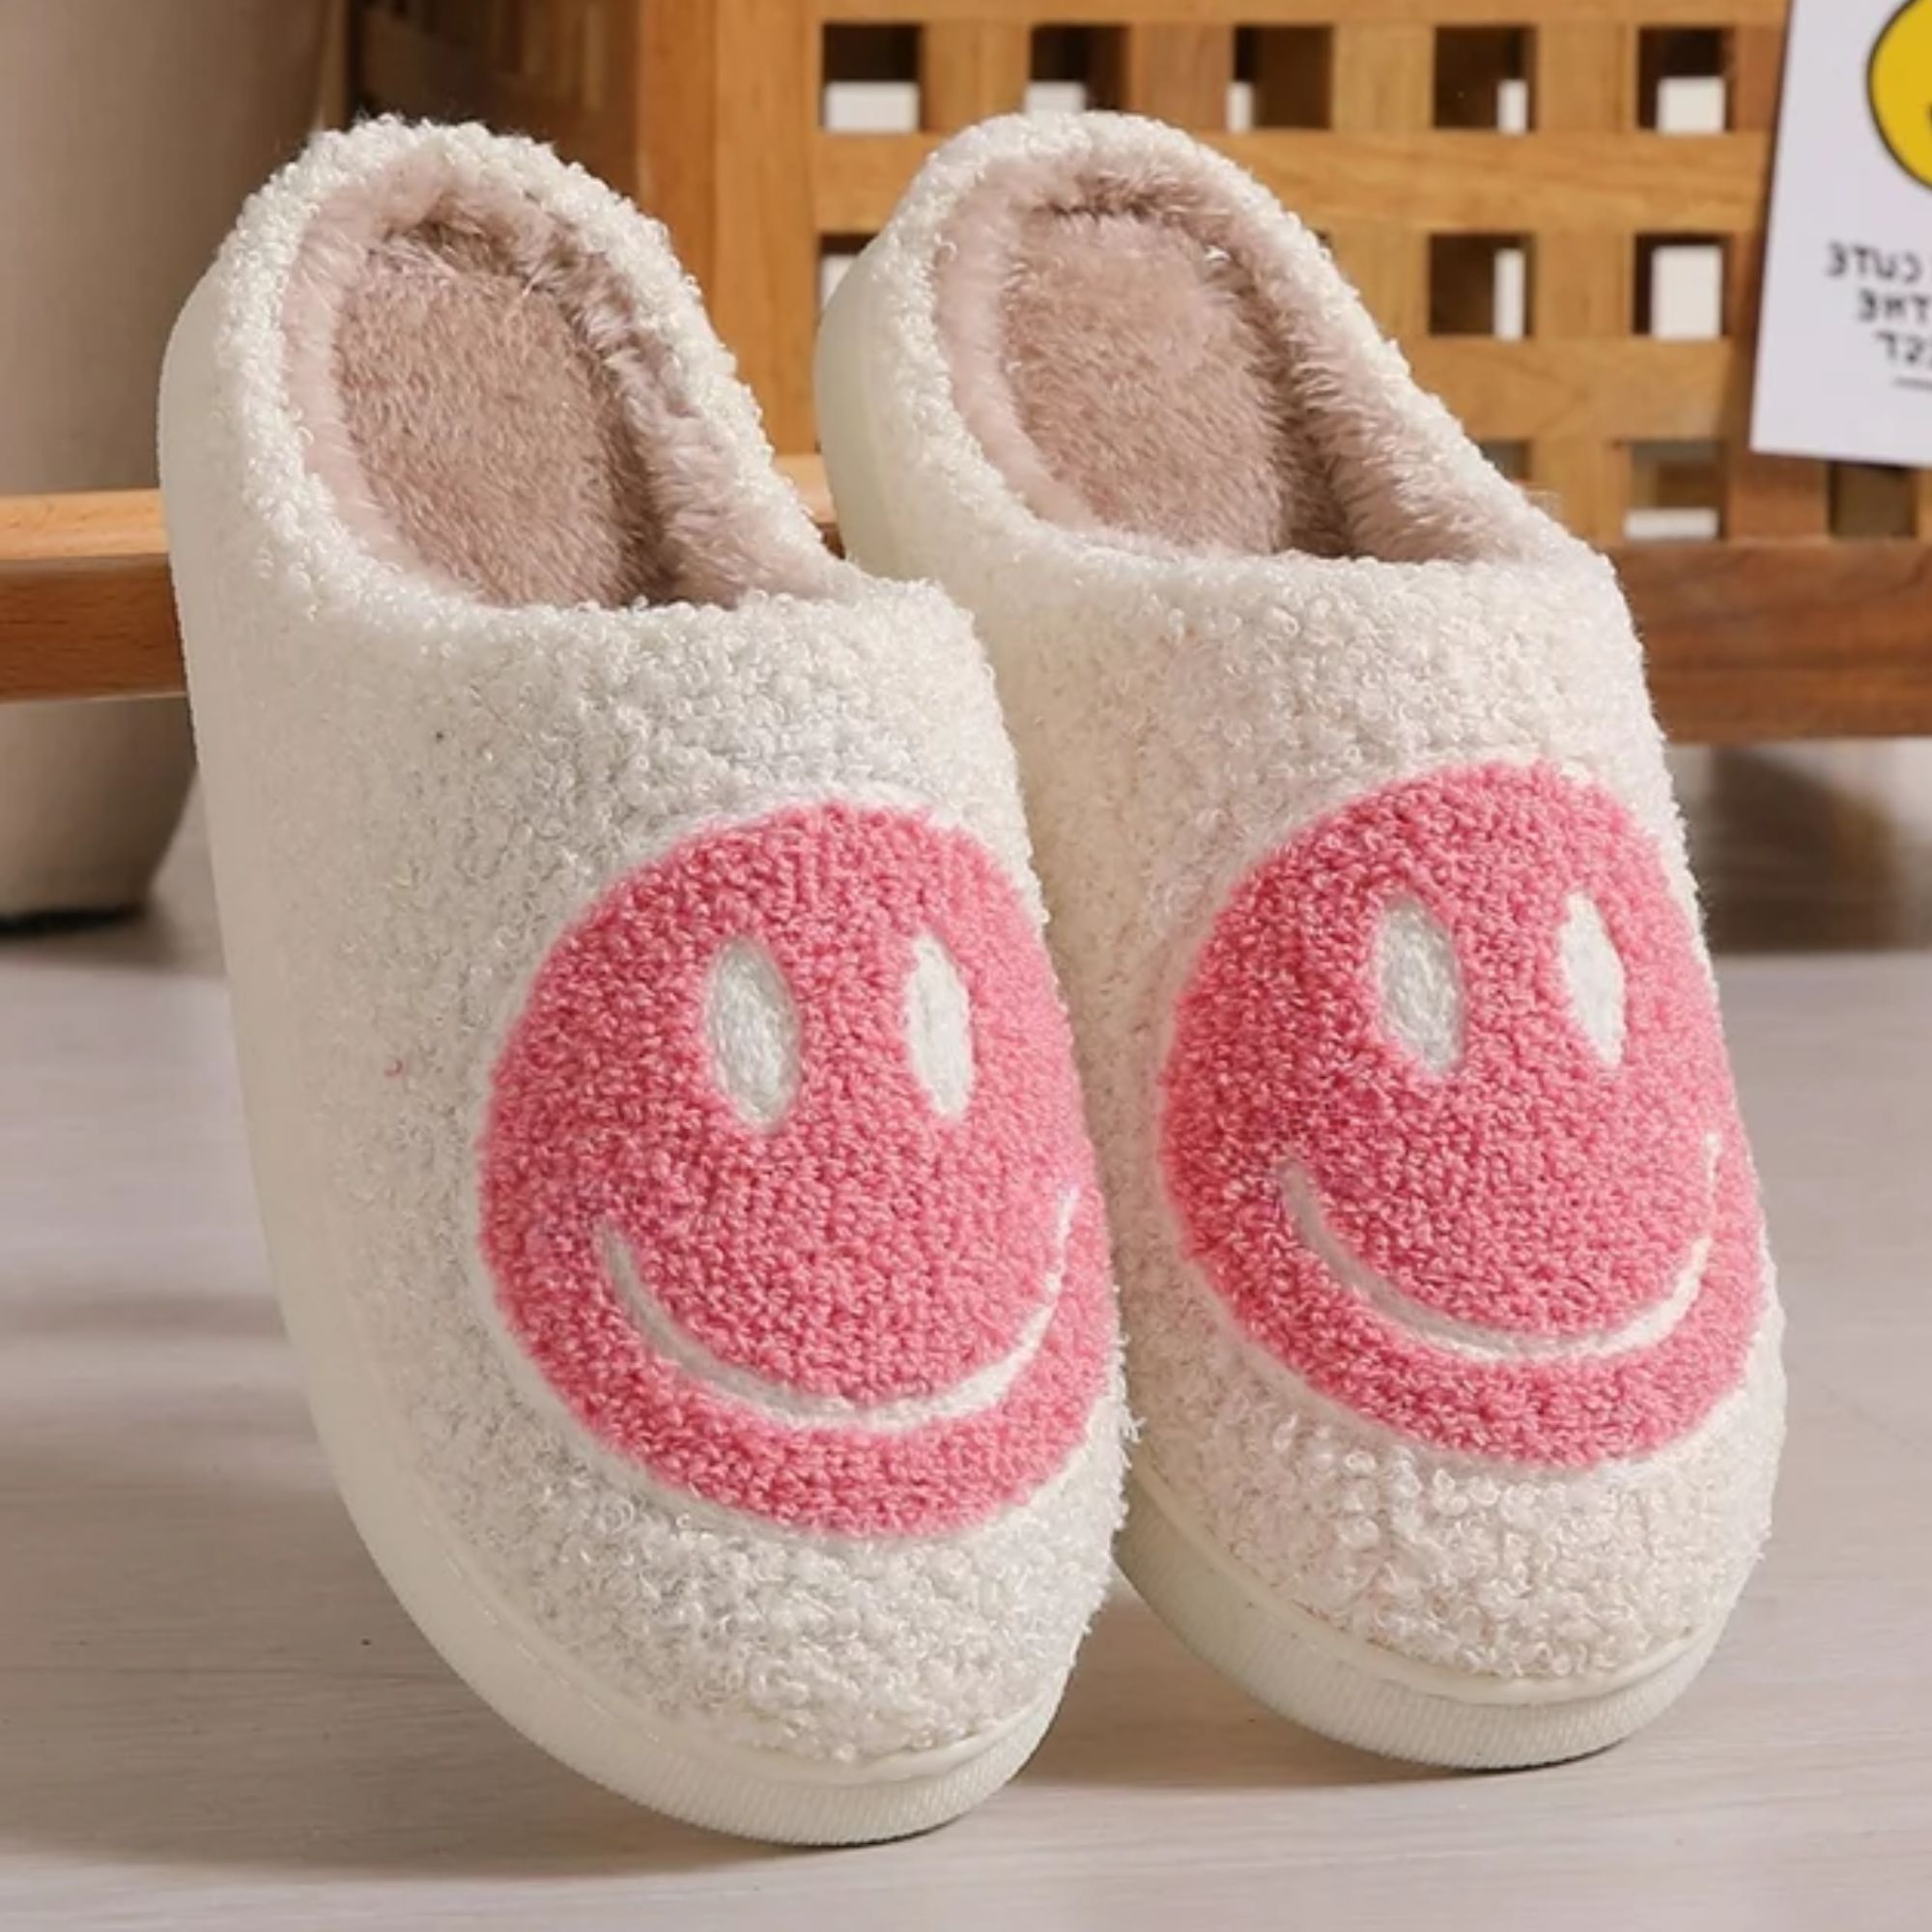 BERANMEY Cute Smile Face Slippers for Women Perfect Soft Plush Comfy Warm Slip-On Happy Face Slippers fo Women Indoor fluffy Smile House Slippers for Women and Men Non-slip Fuzzy Flat Slides - image 3 of 7